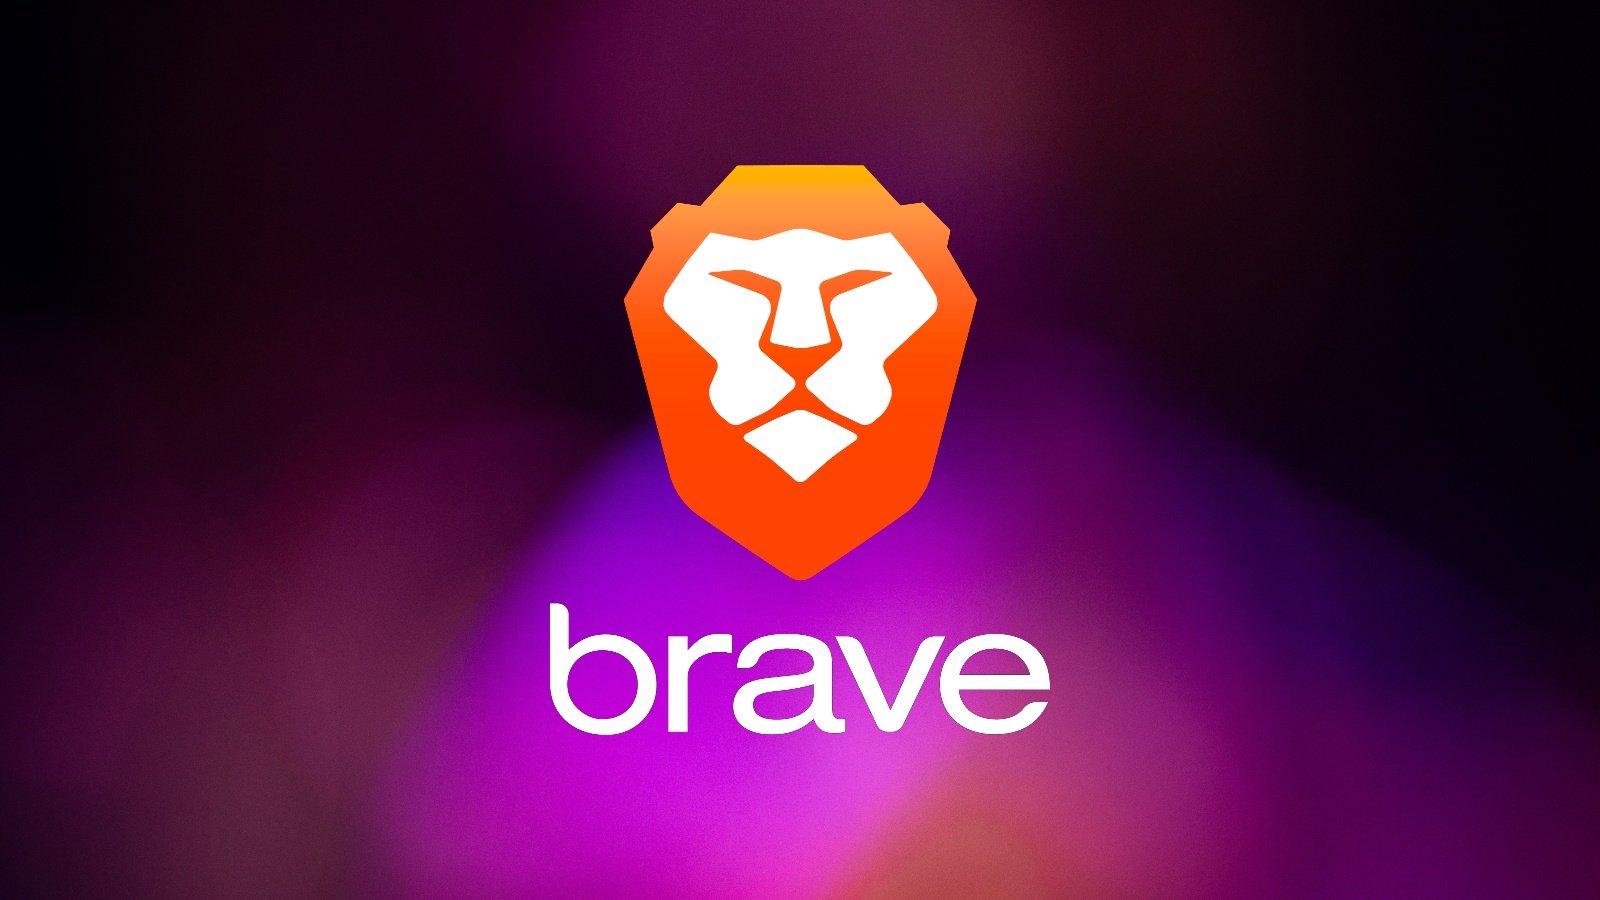 Brave browser latest version boundary boss pdf free download